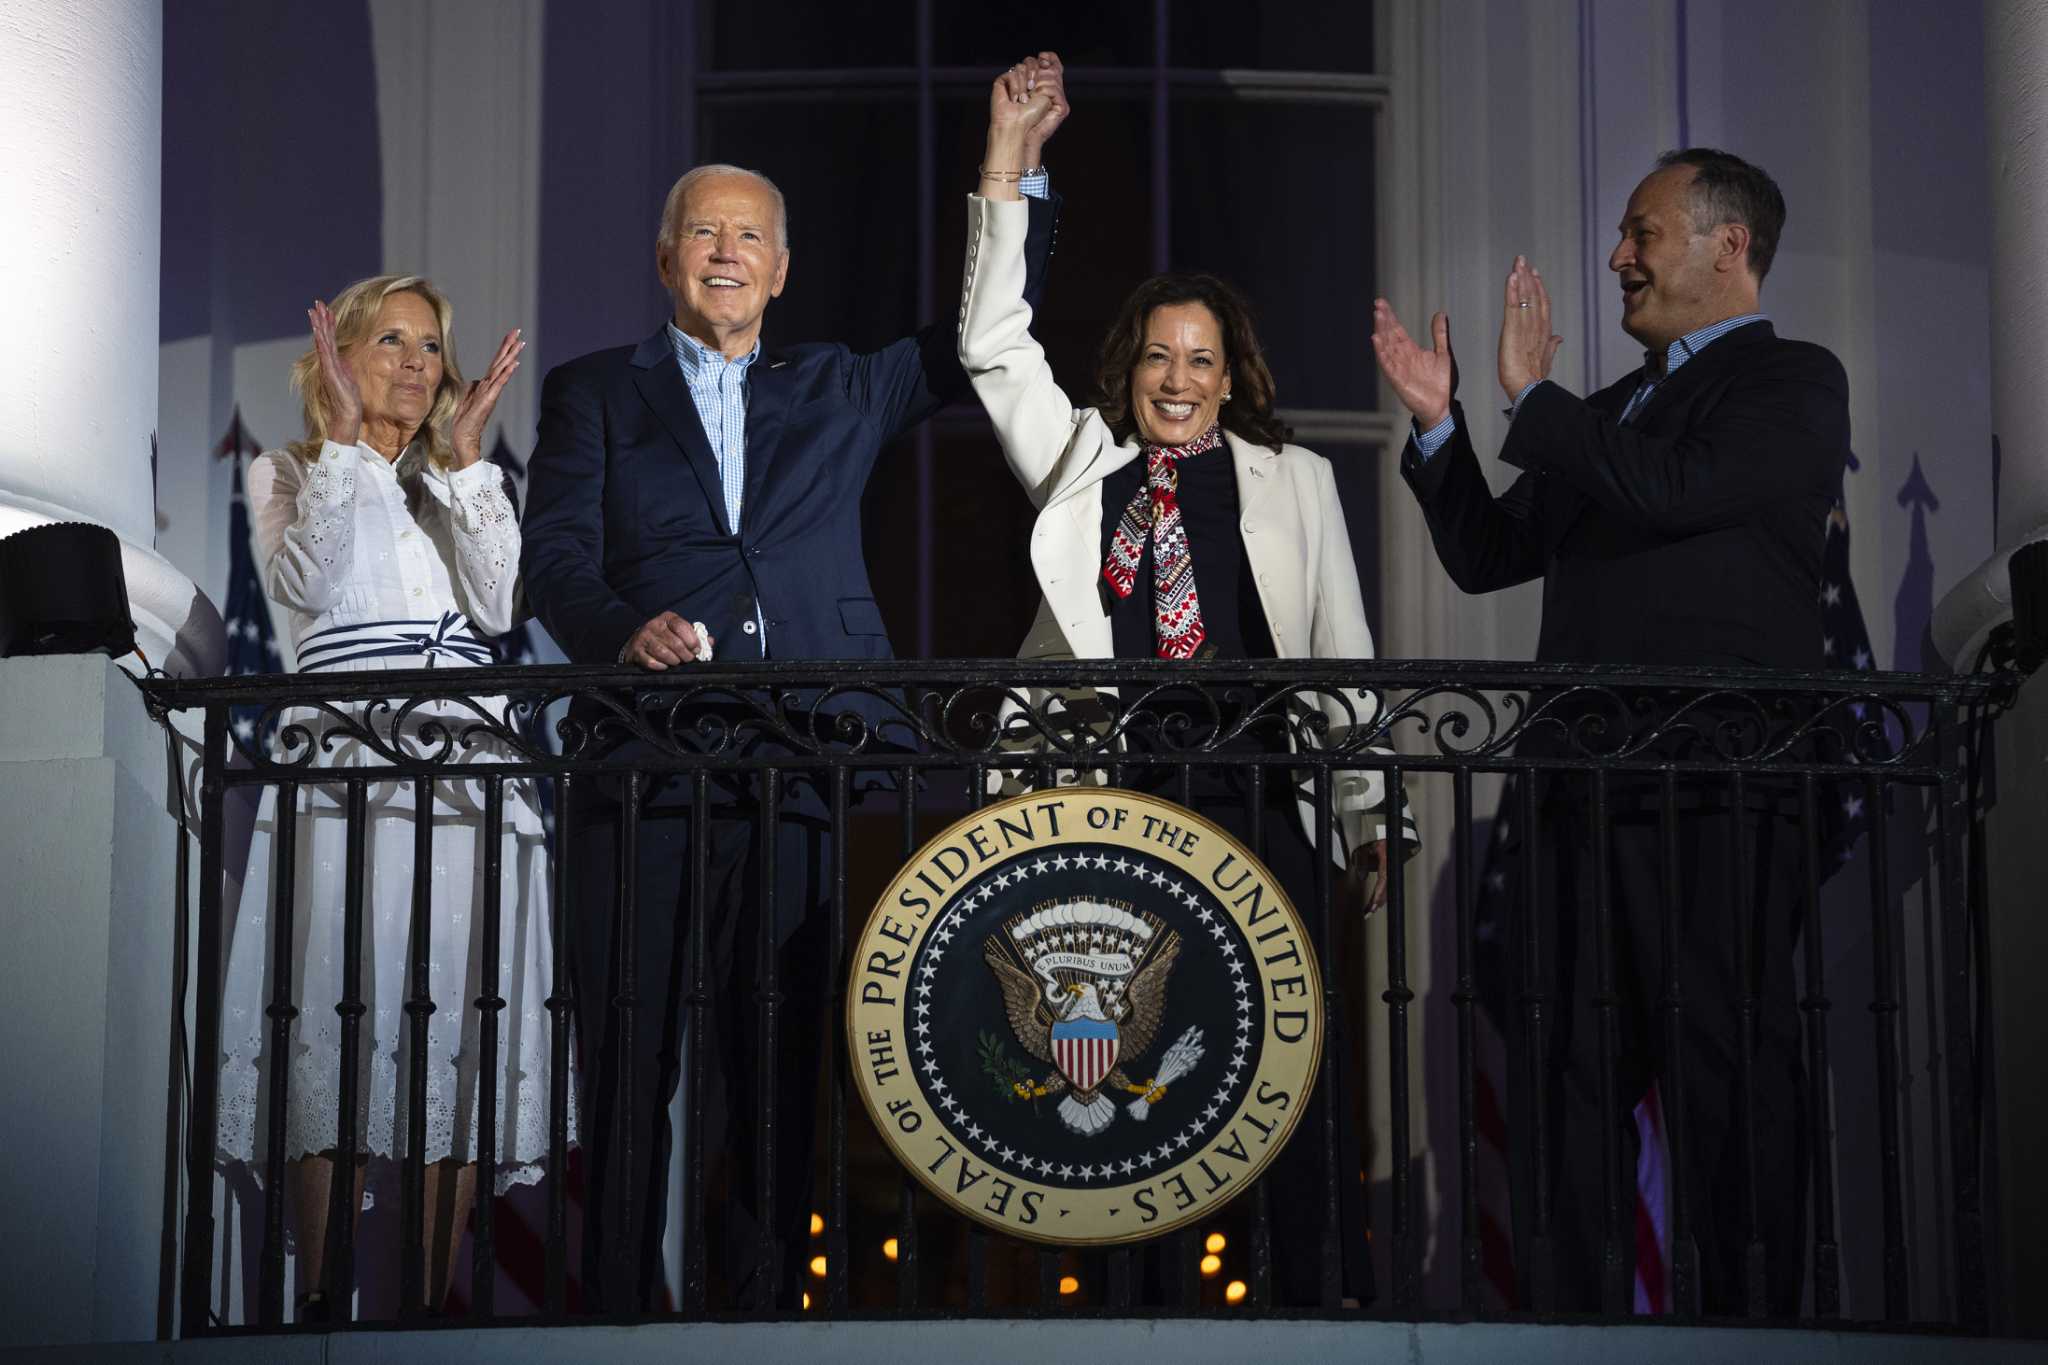 Biden's decision to drop out crystallized Sunday. His staff knew one minute before the public did